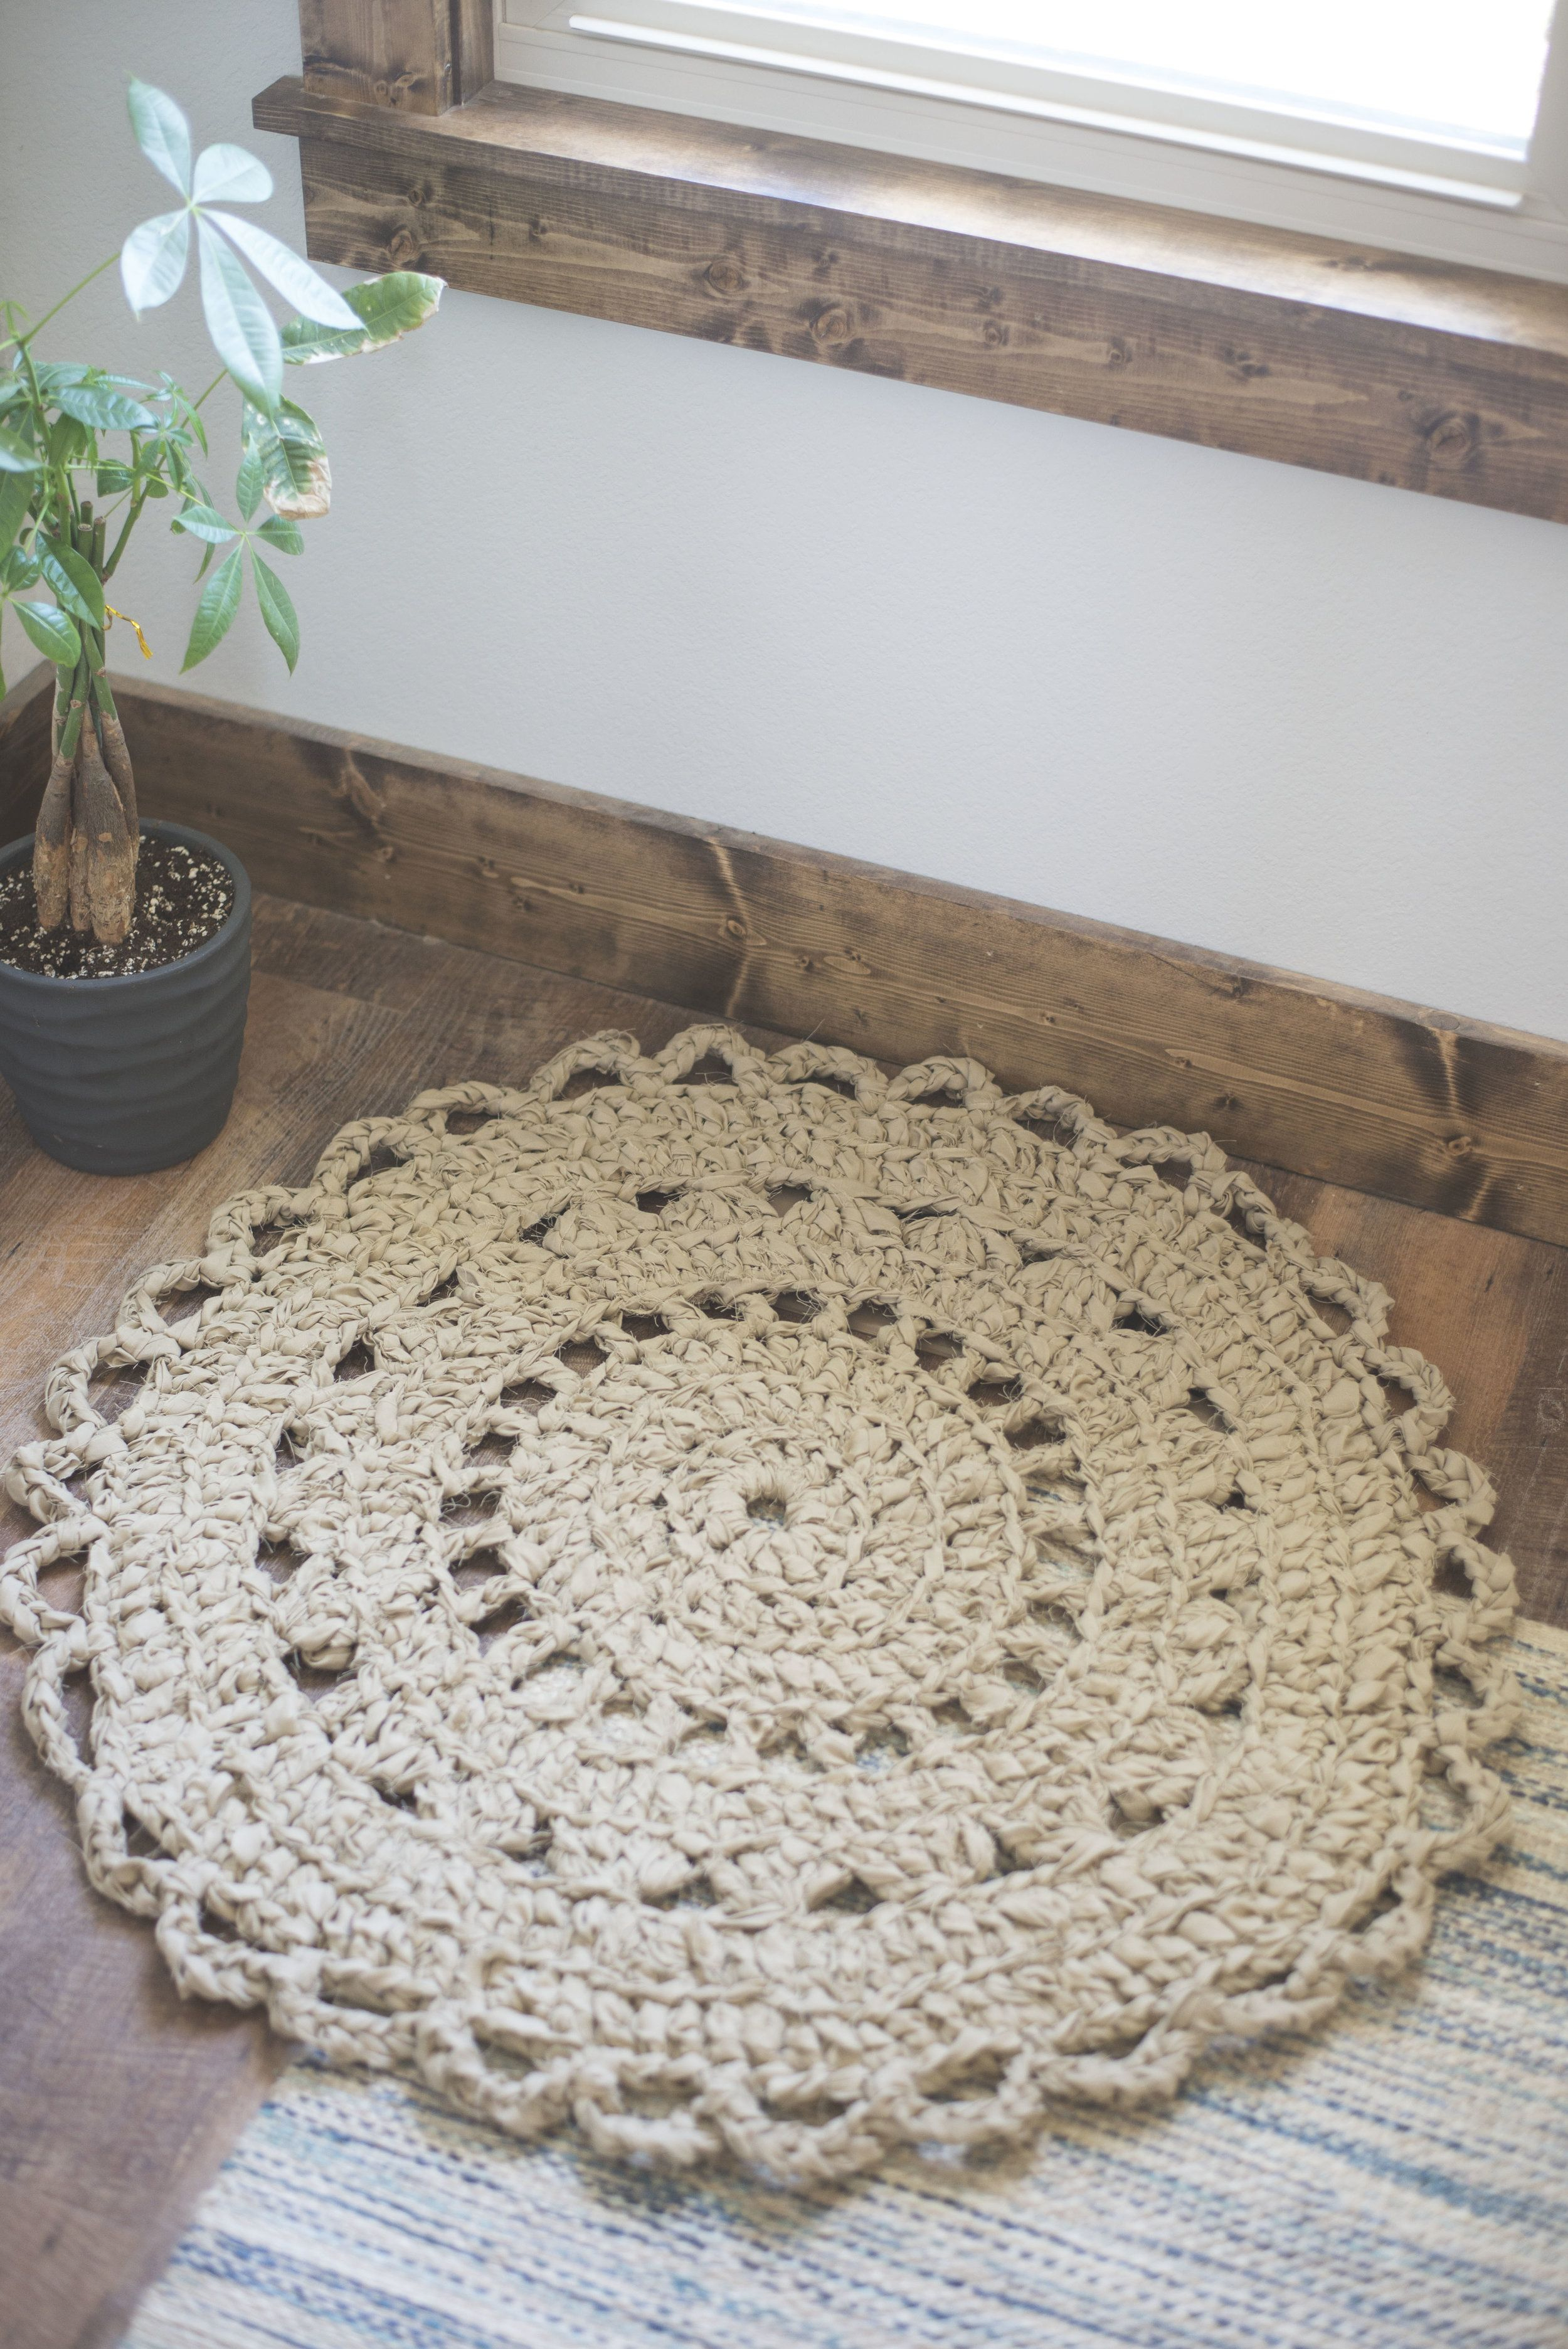 Crochet Rug Pattern Crochet Rug Pattern Made From Bed Sheets Love The Rustic Shab